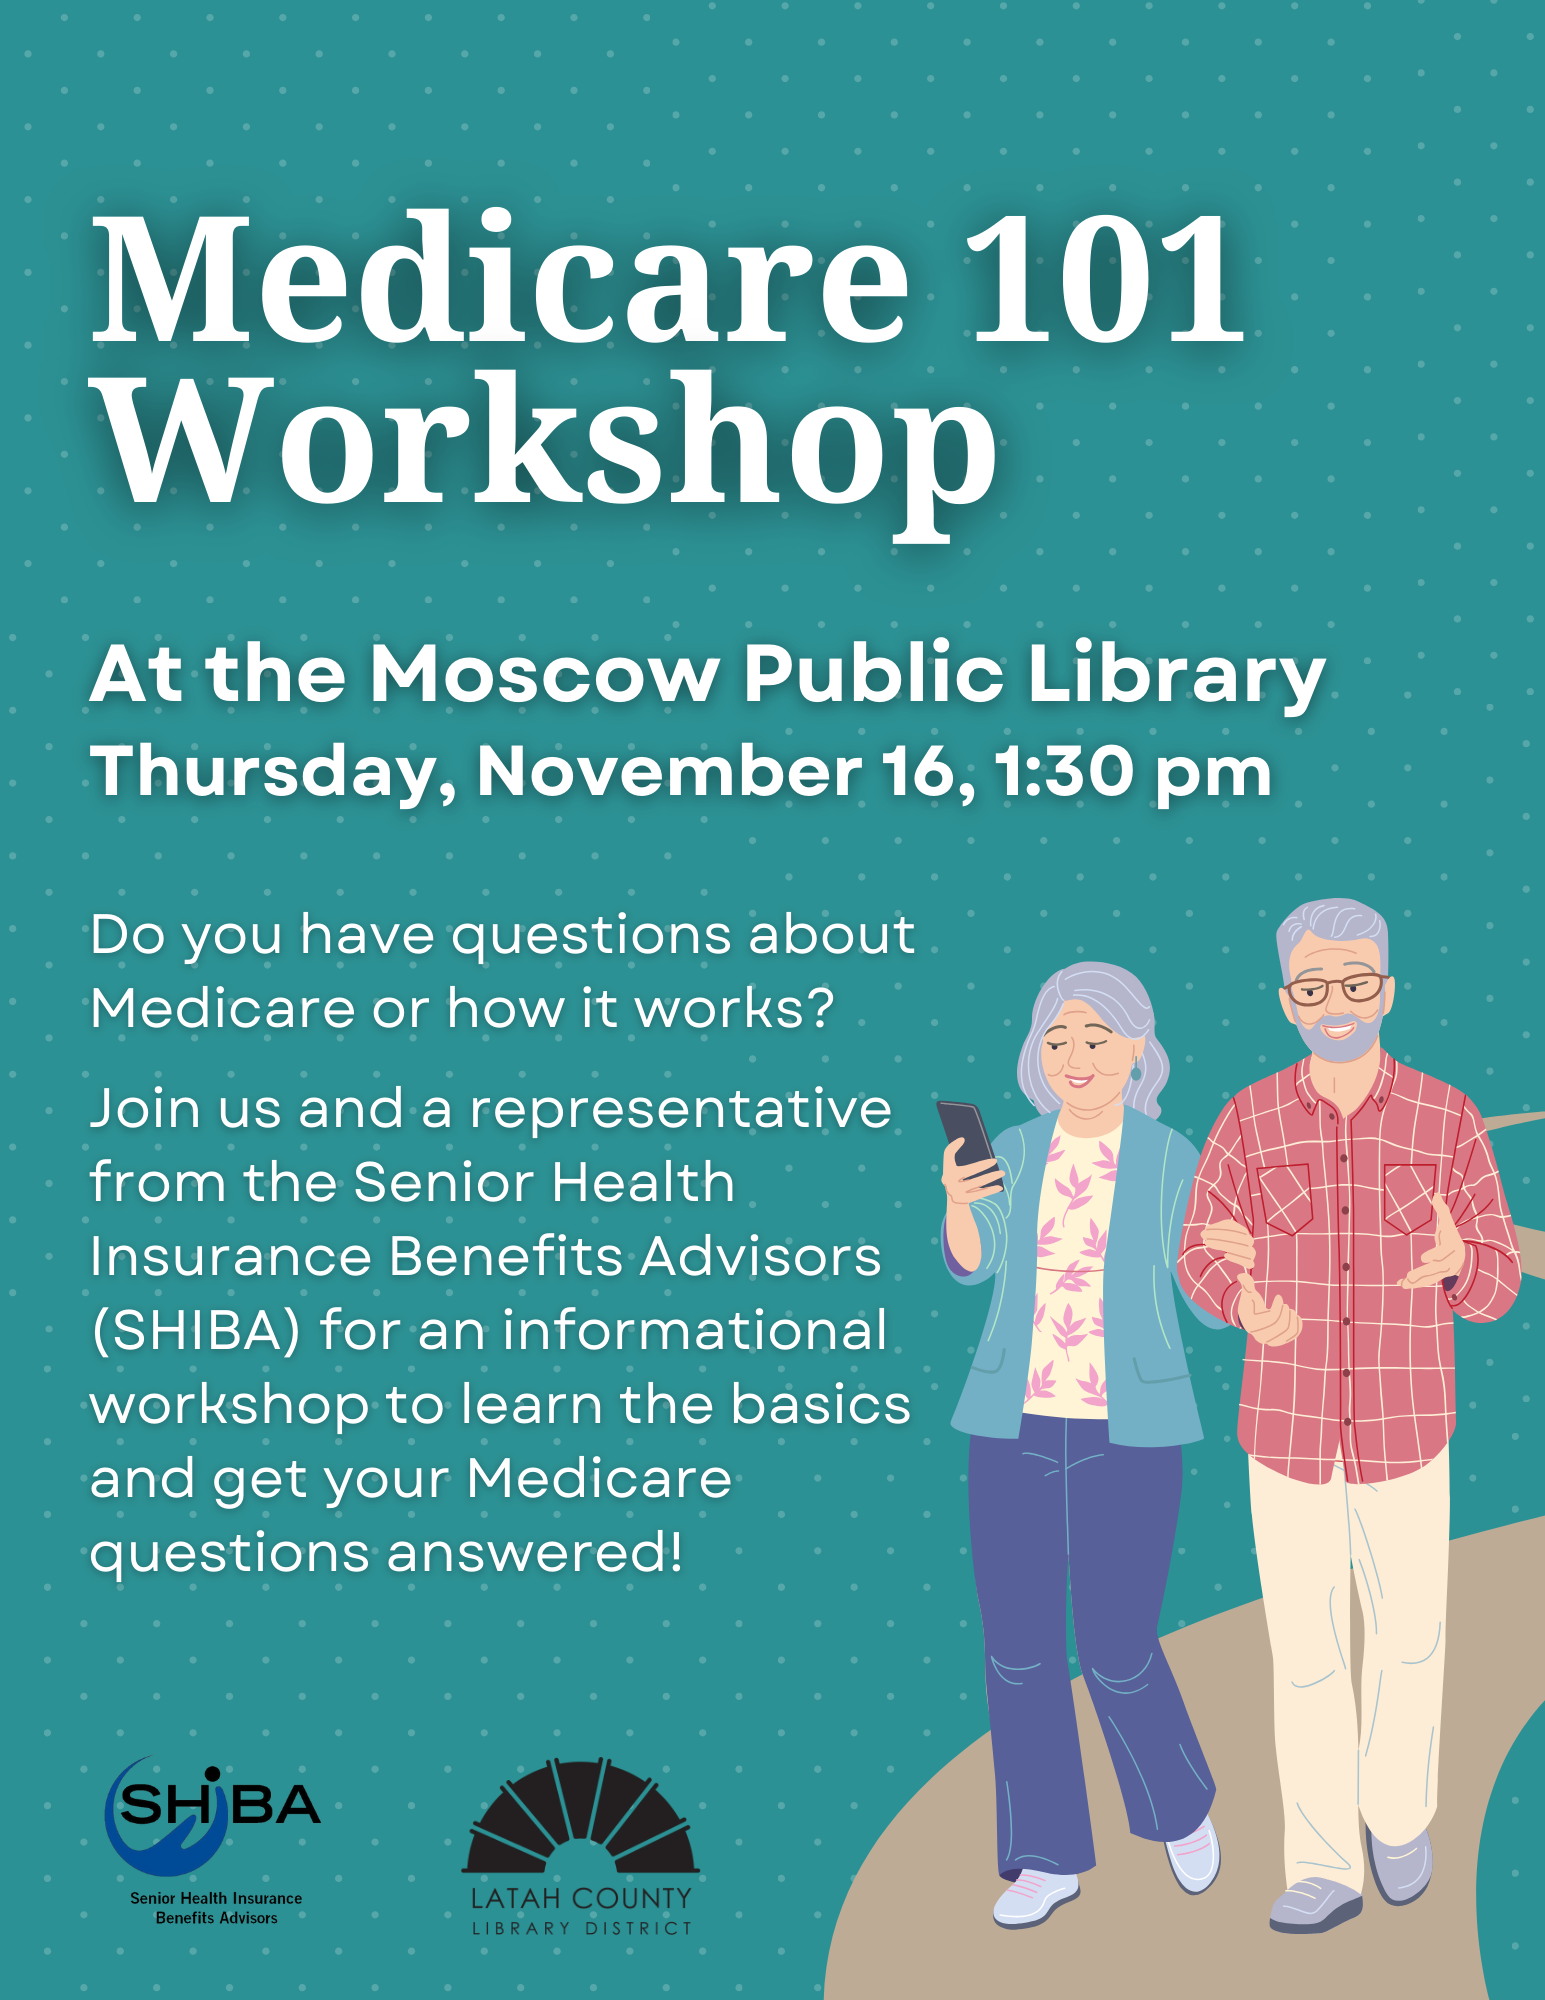 Medicare 101 Workshop at the Moscow Public Library